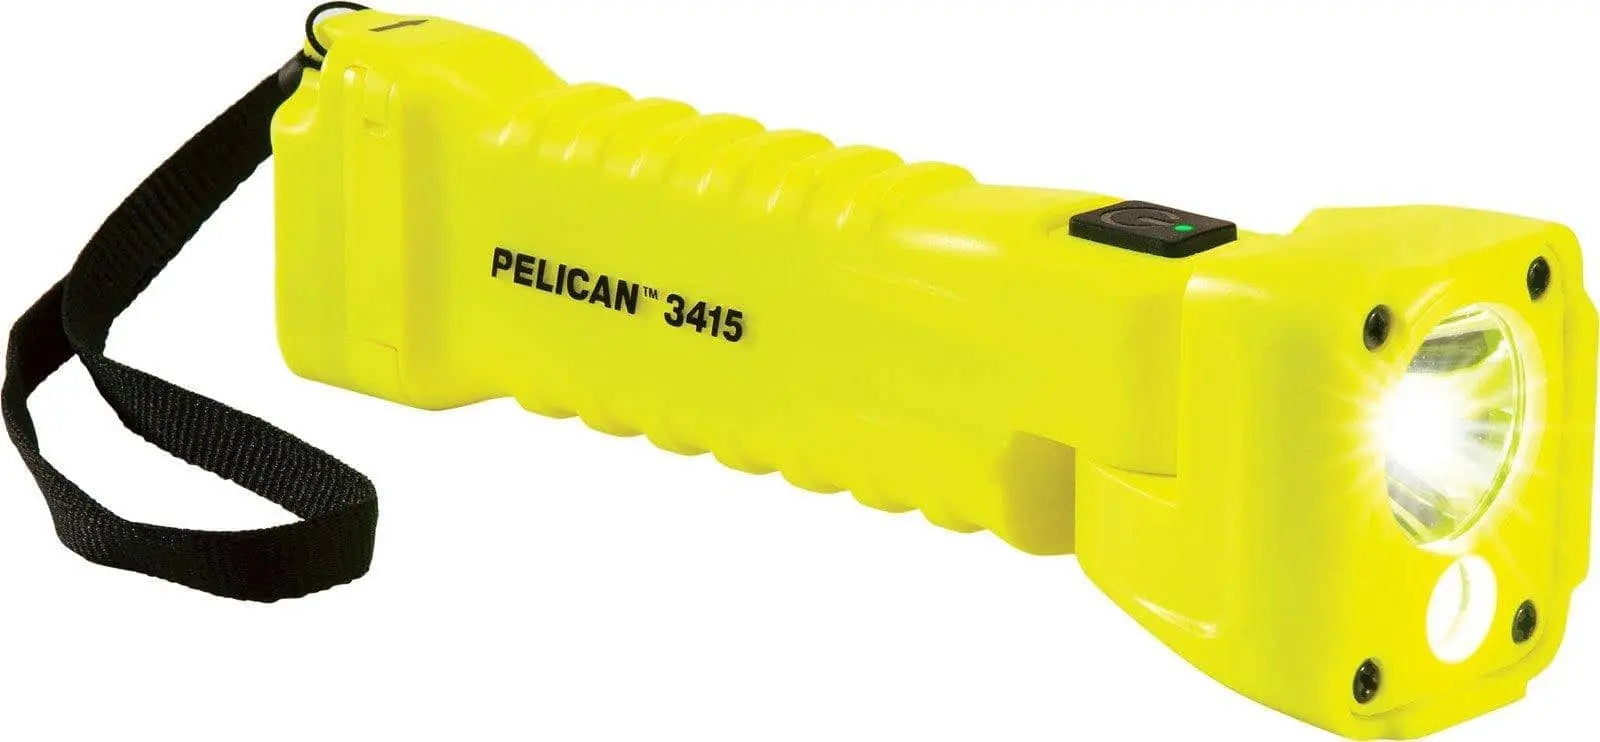 PELICAN - 3415 Right Angle Light - Becker Safety and Supply